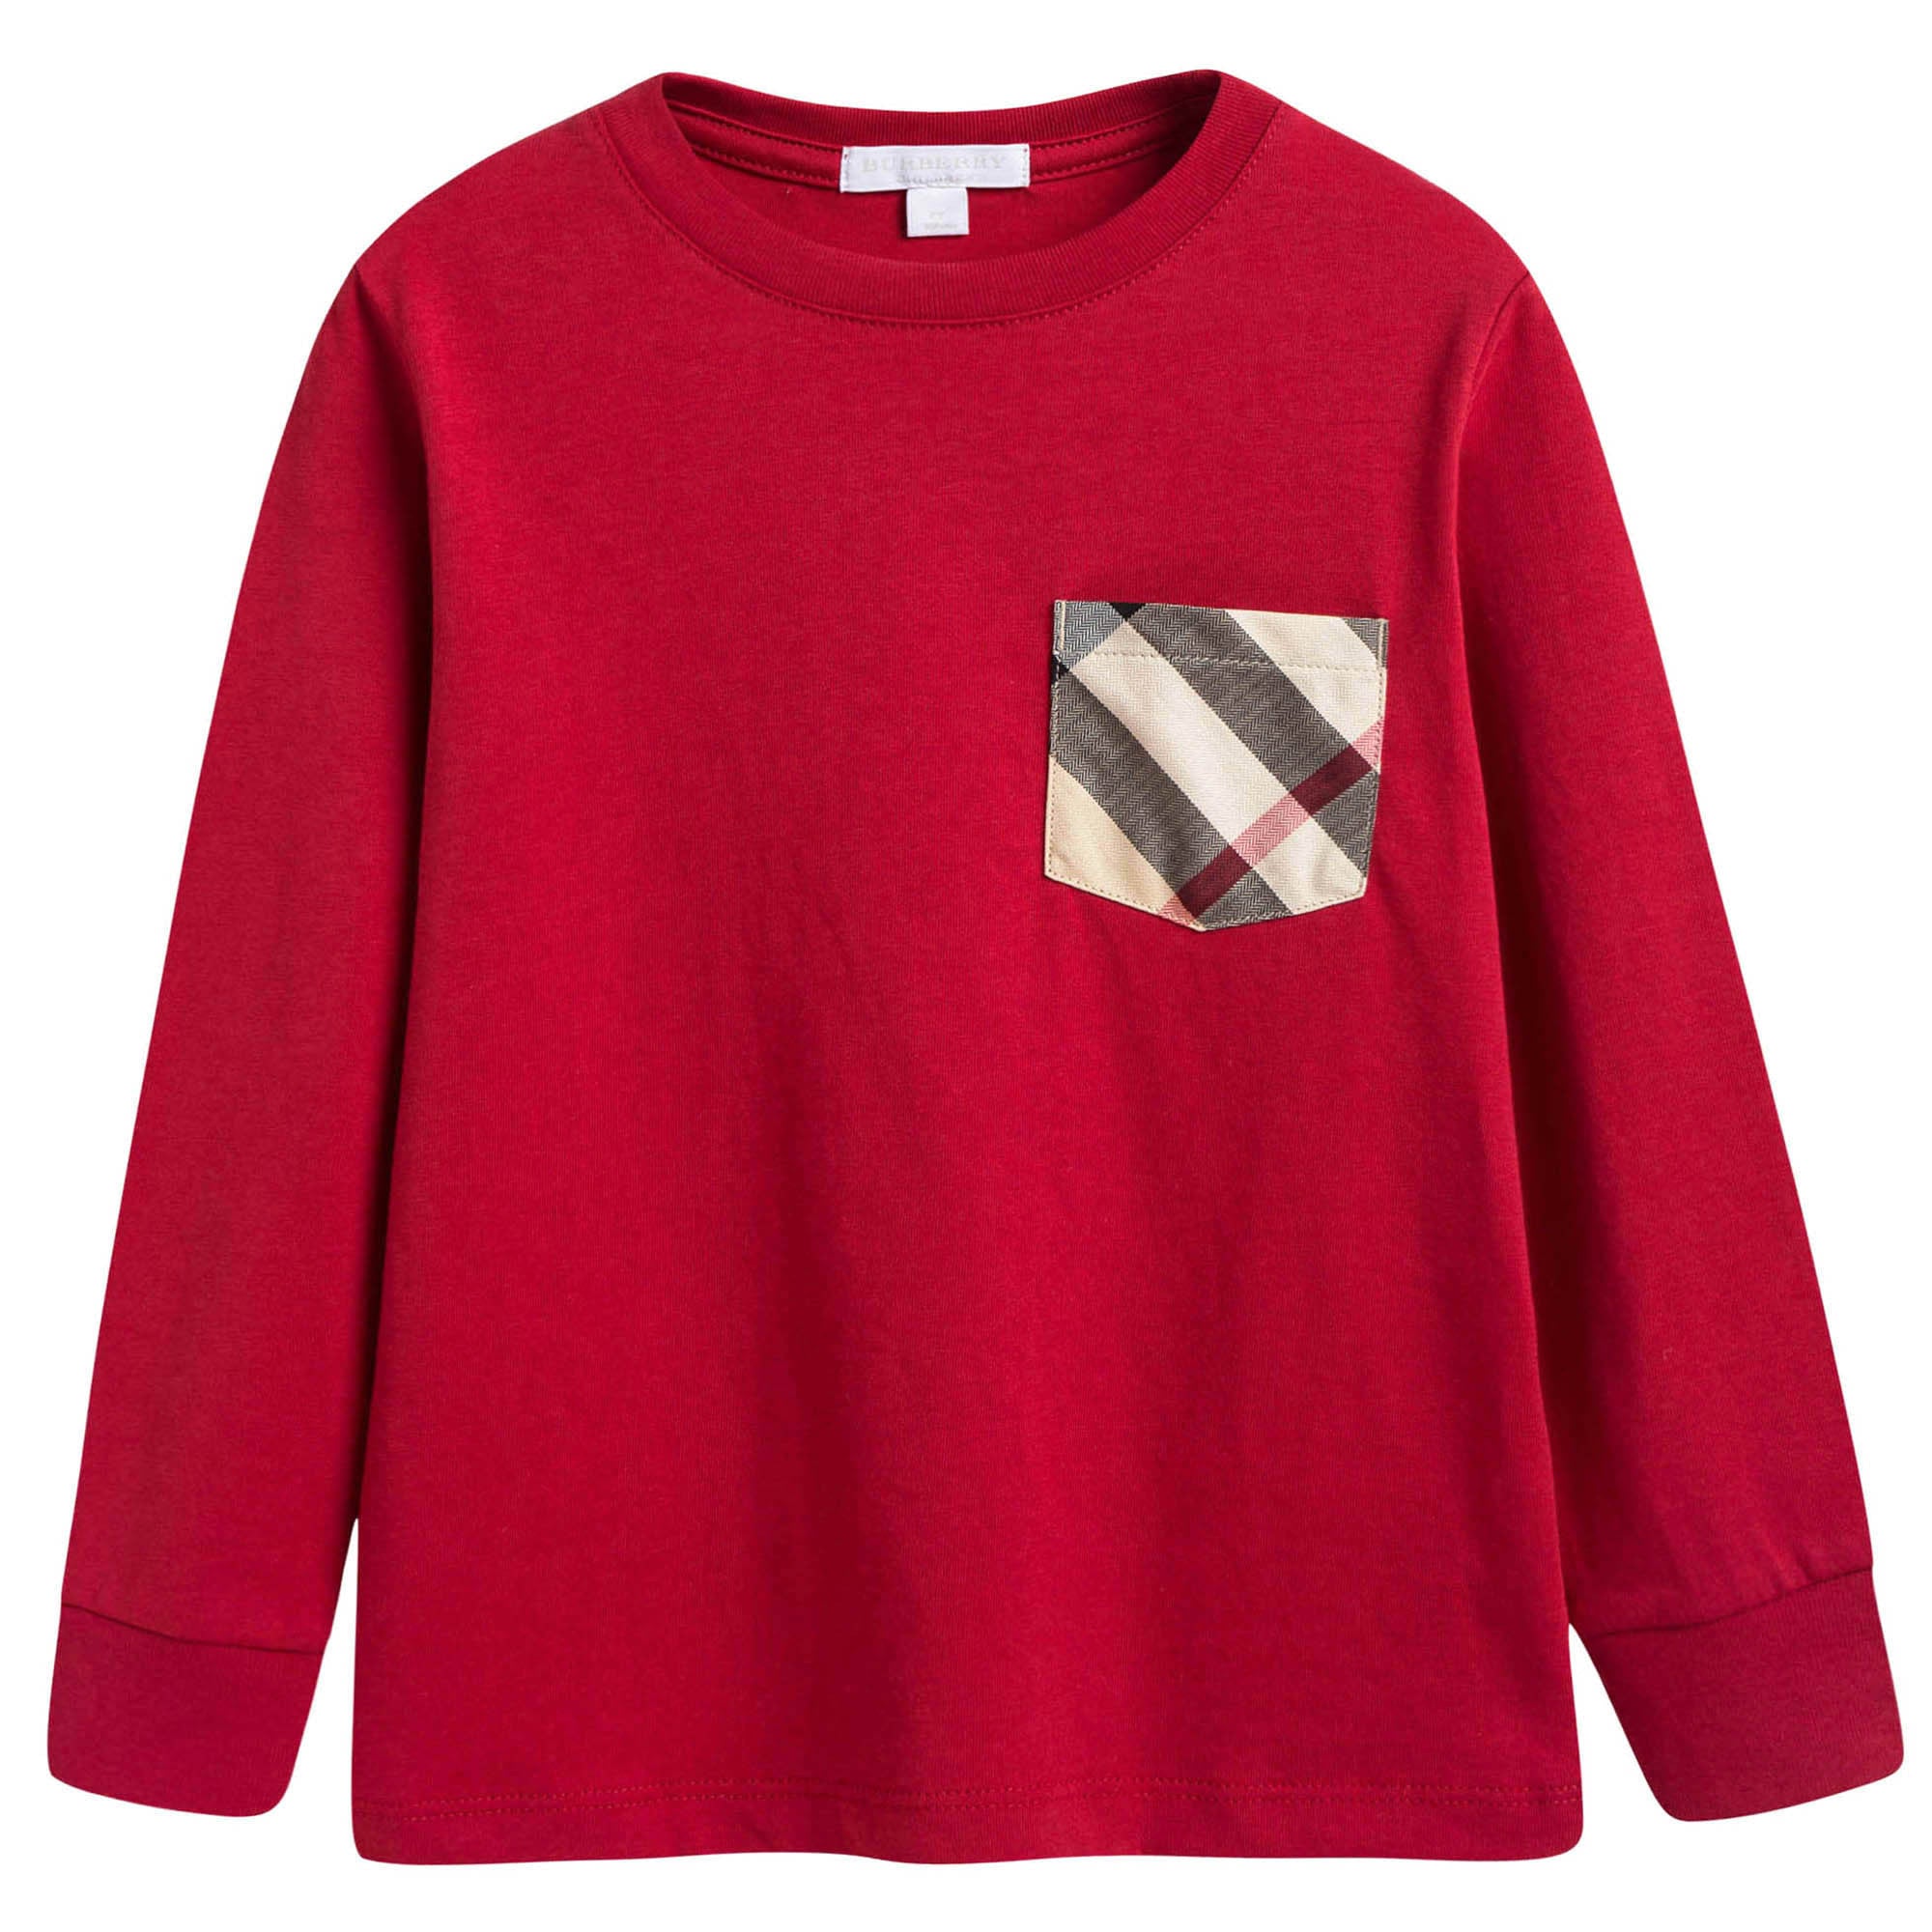 Boys Red Cotton T-shirt With Check Pocket